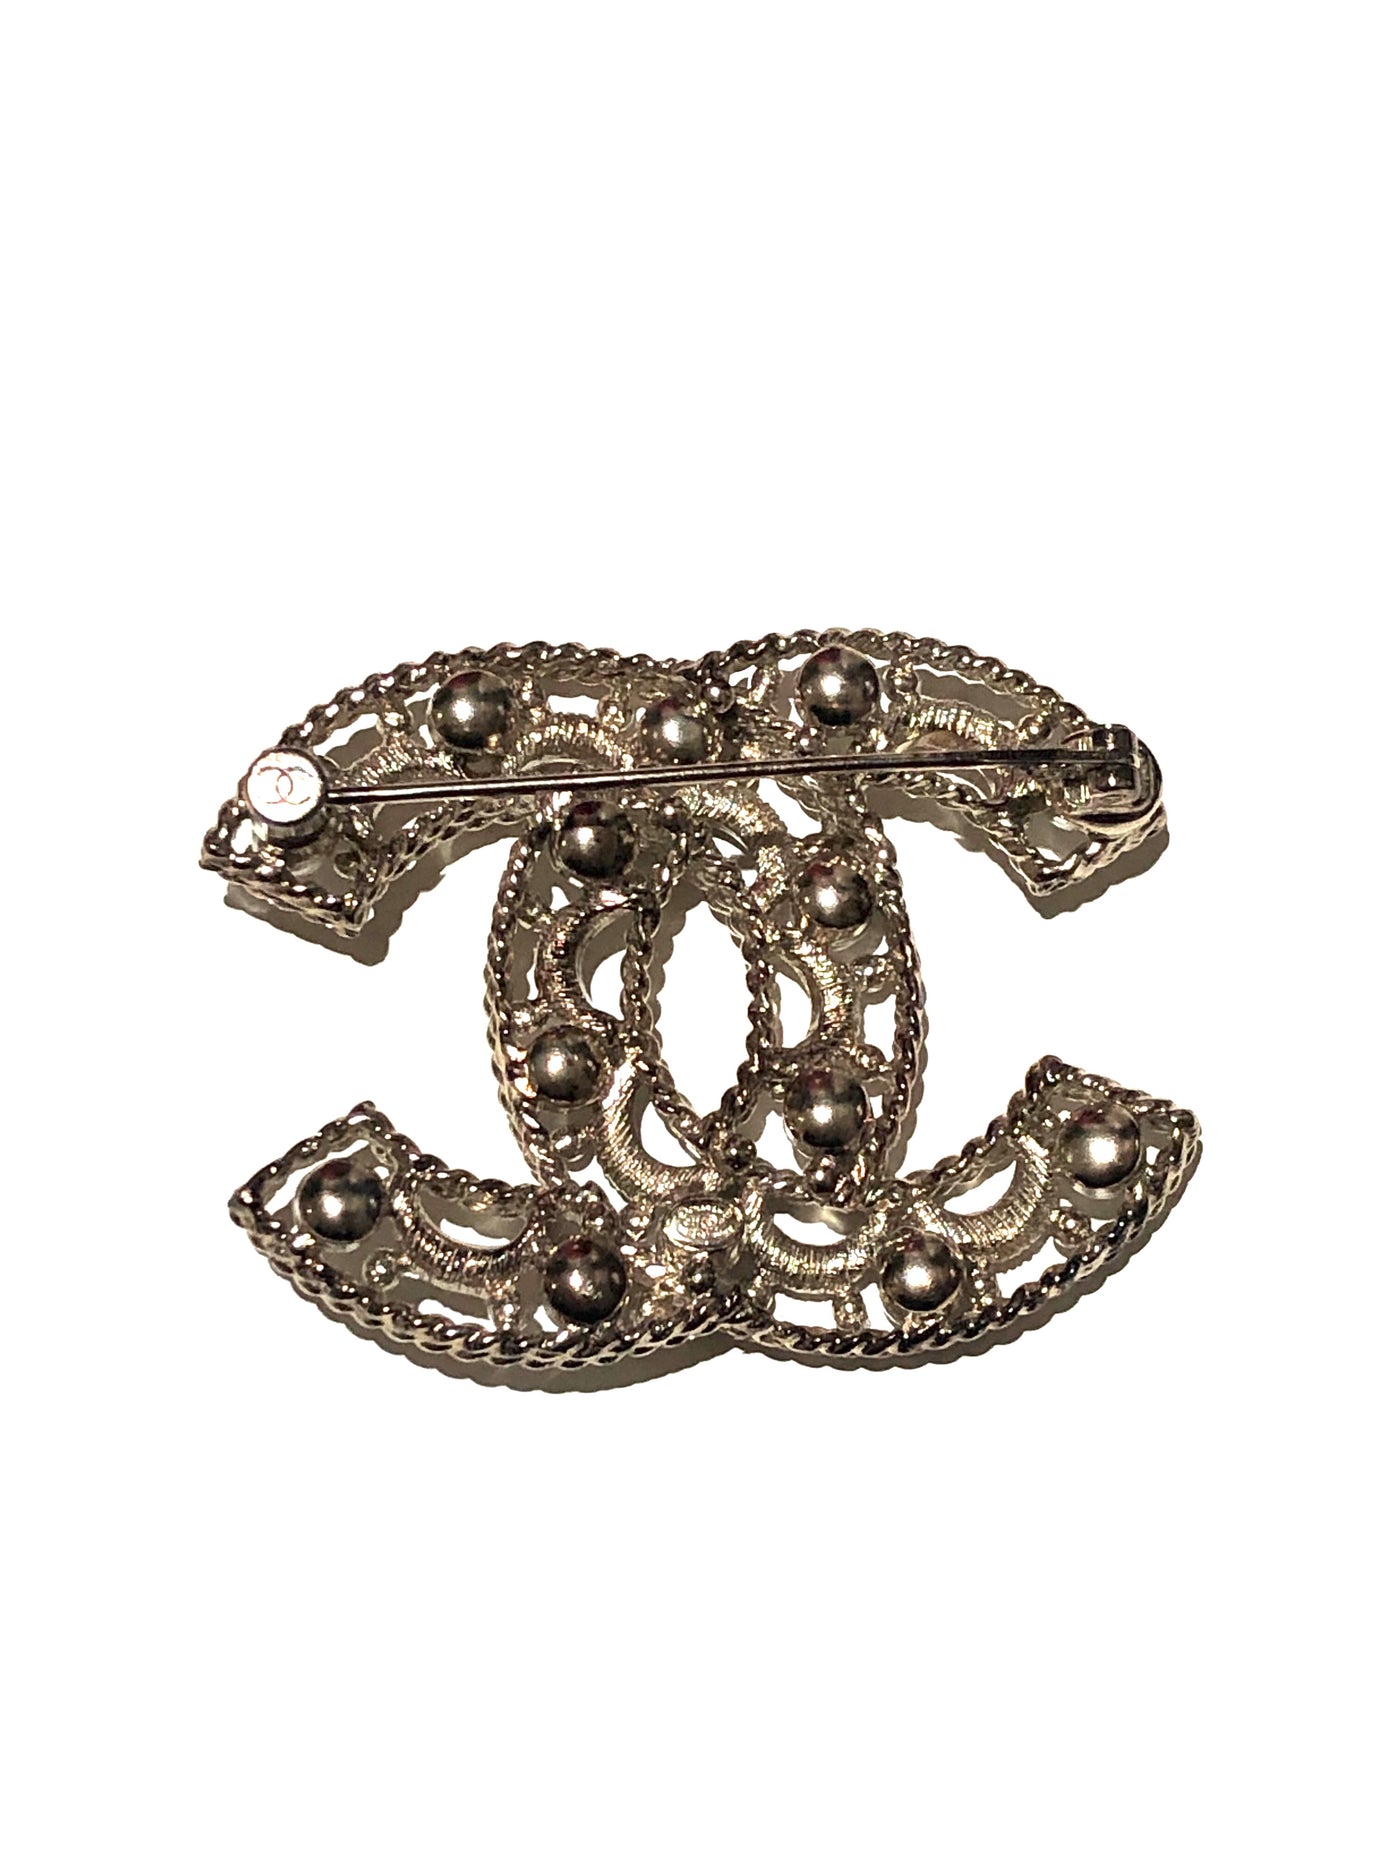 CHANEL CC Brooch light gold with pearls Cruise 2021 Collection